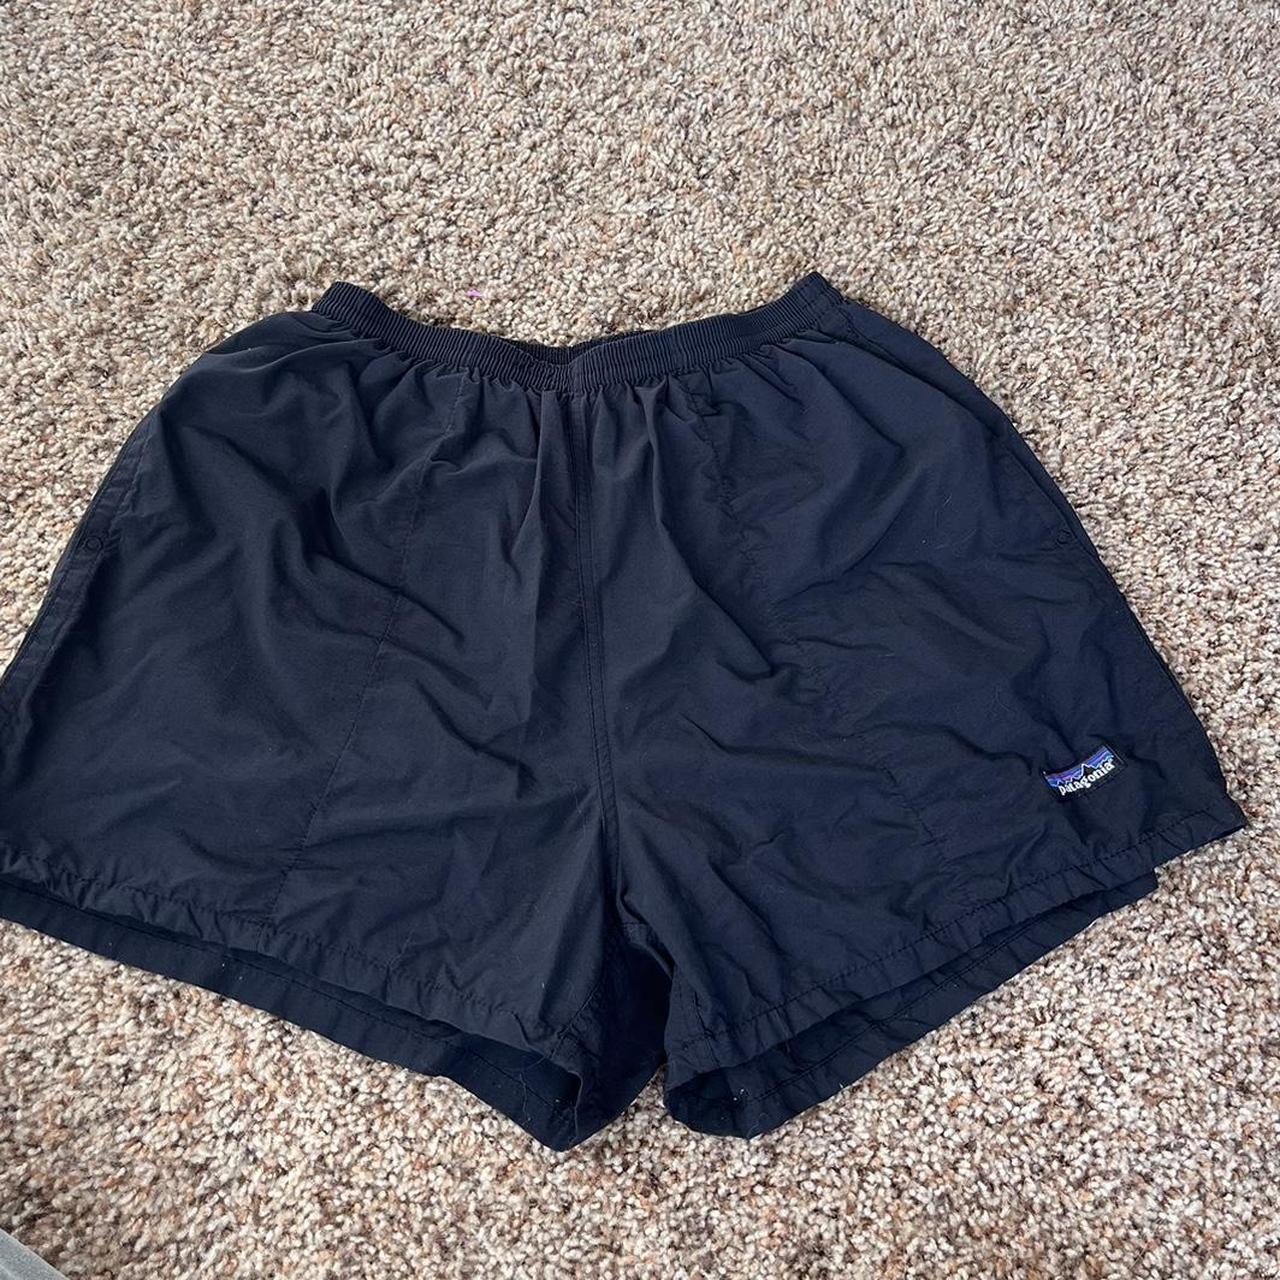 Mens Patagonia swim shorts With lining and pockets... - Depop